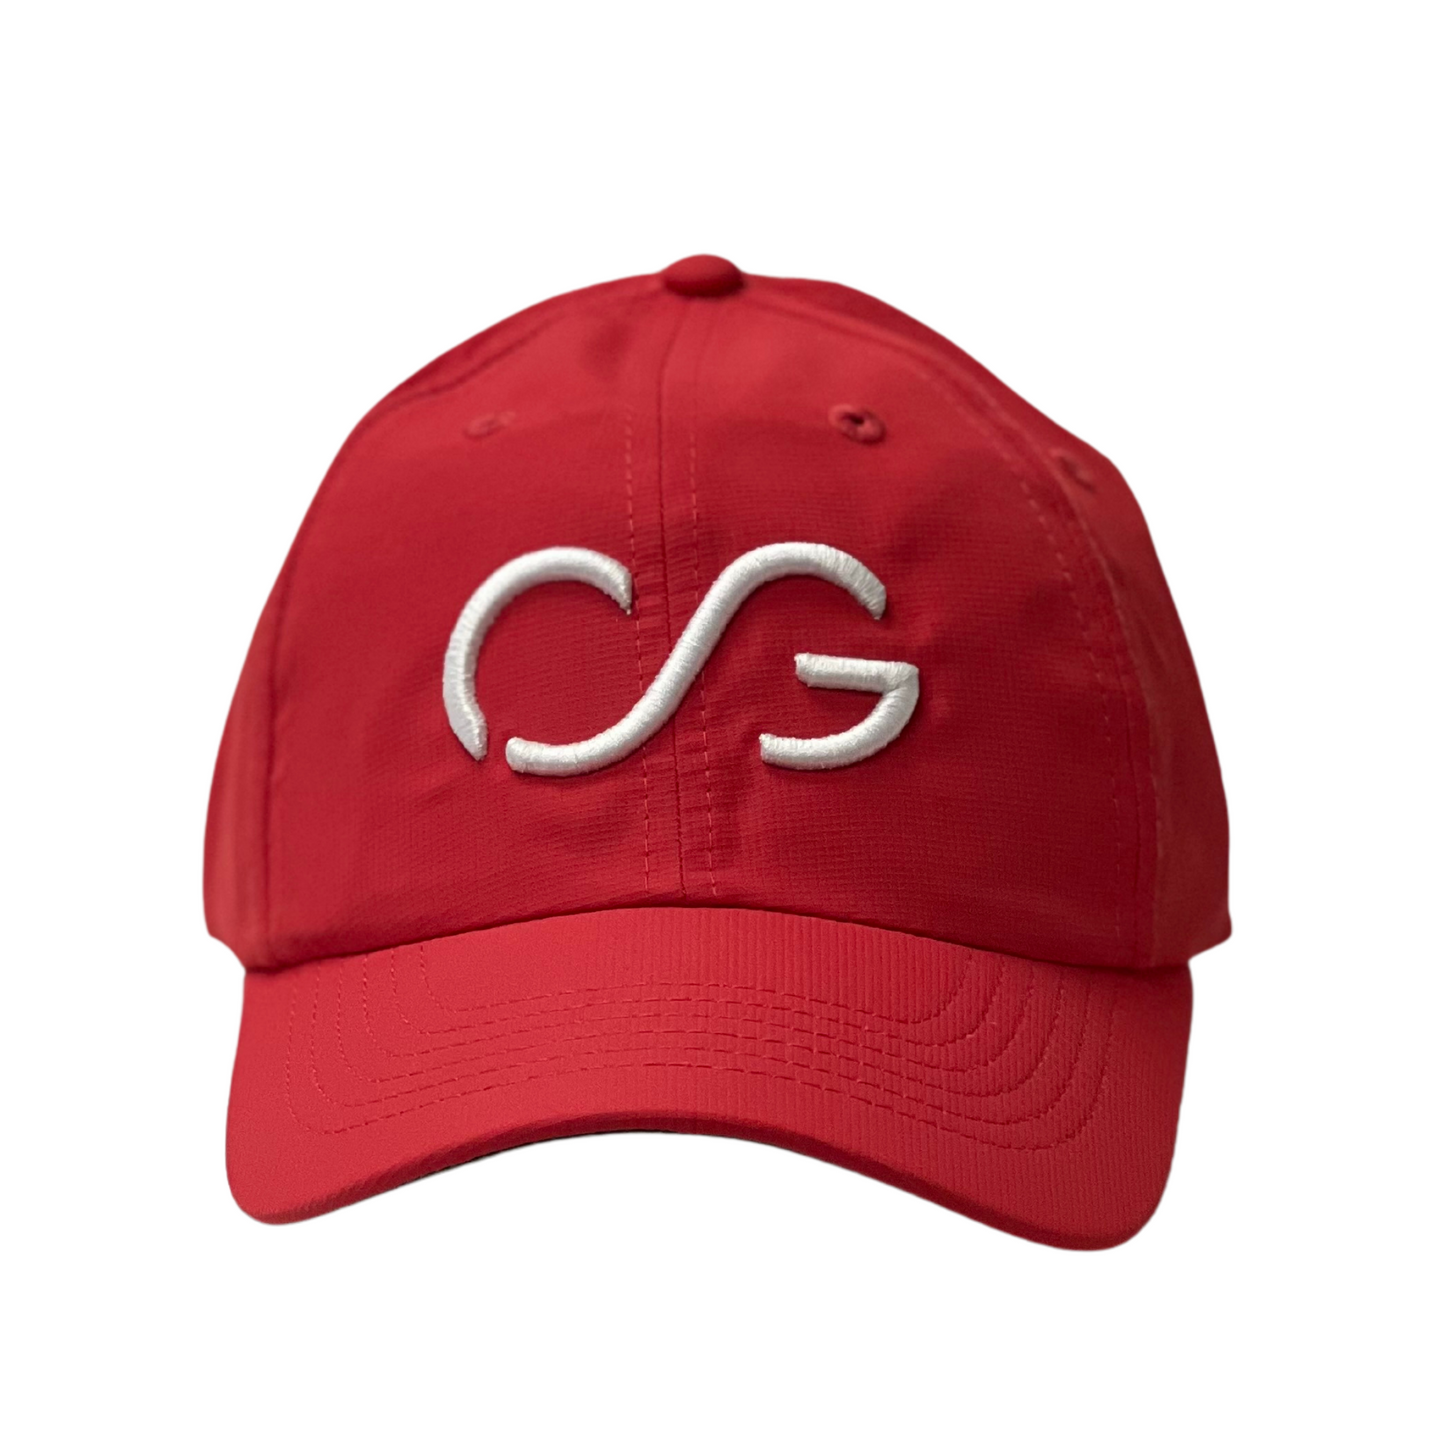 Imperial Performance Hat